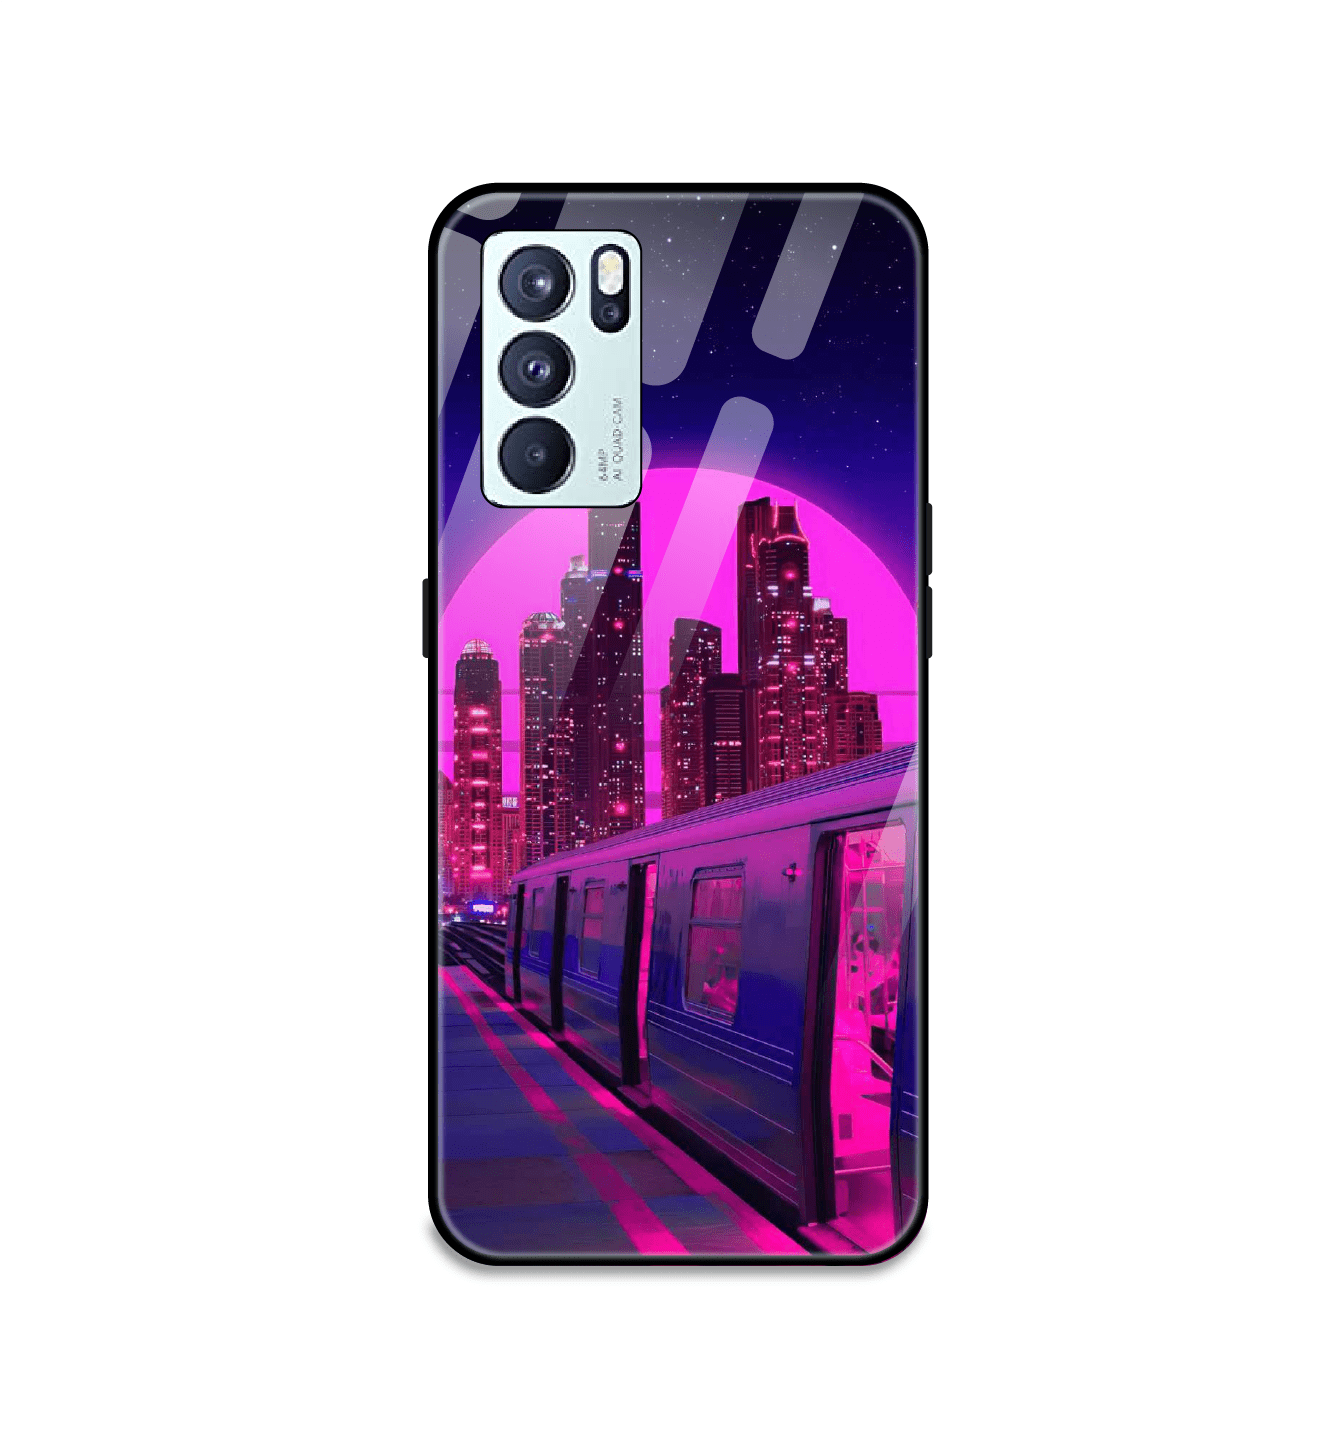 Neon City Synthwave - Glass Cases For Oppo Models